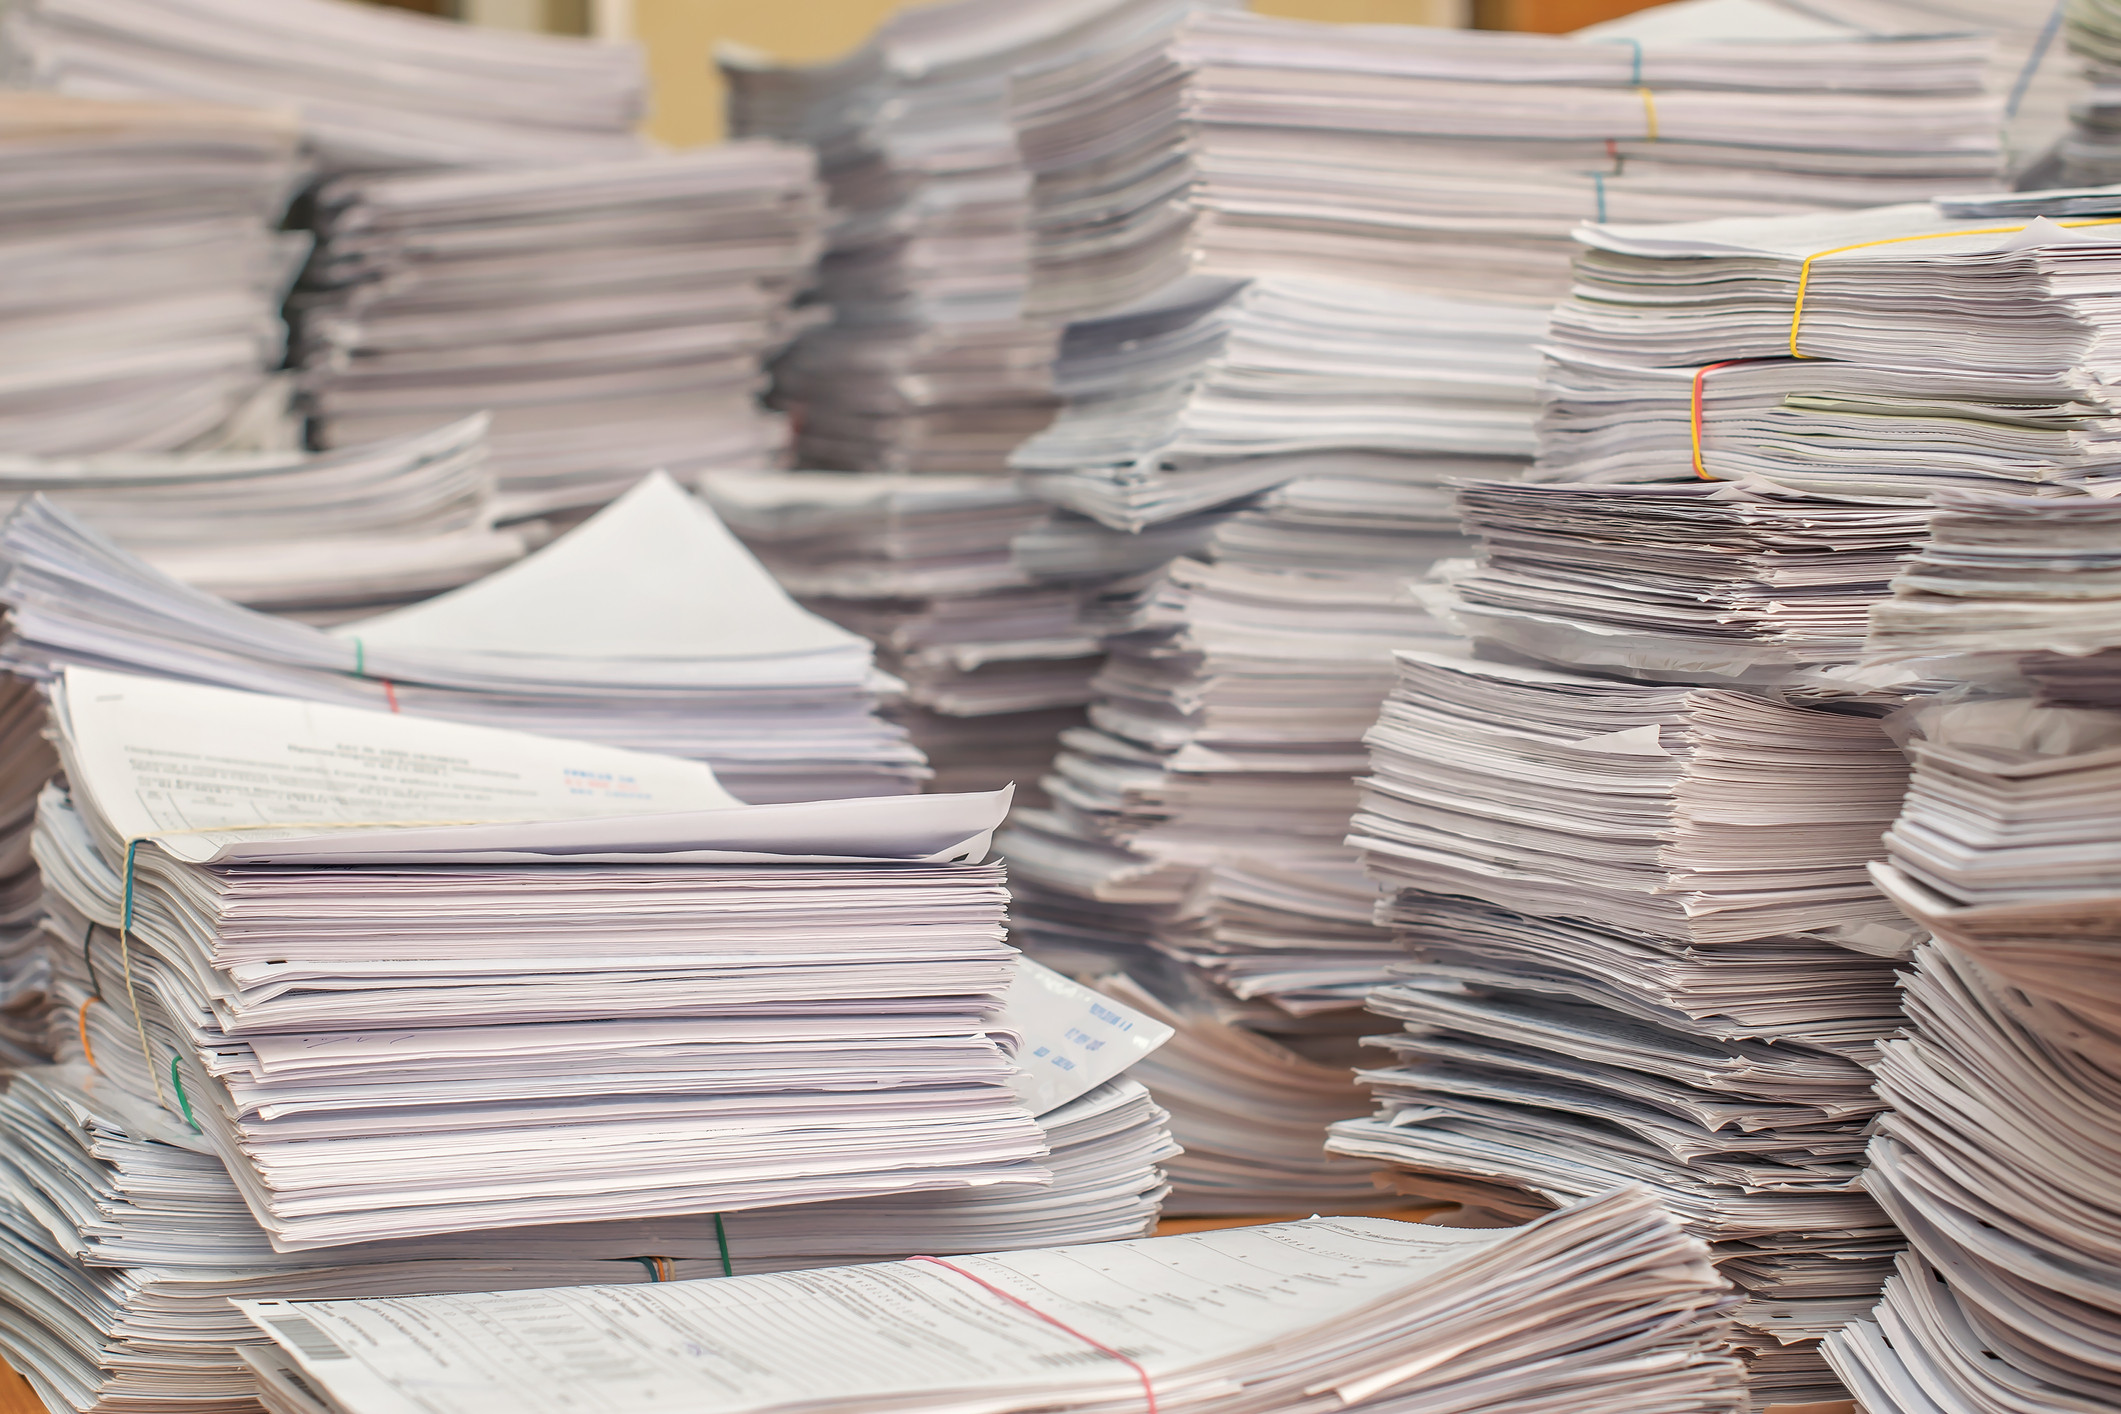 Huge piles of paperwork covering a desk, representing the security clearance backlog in 2019.